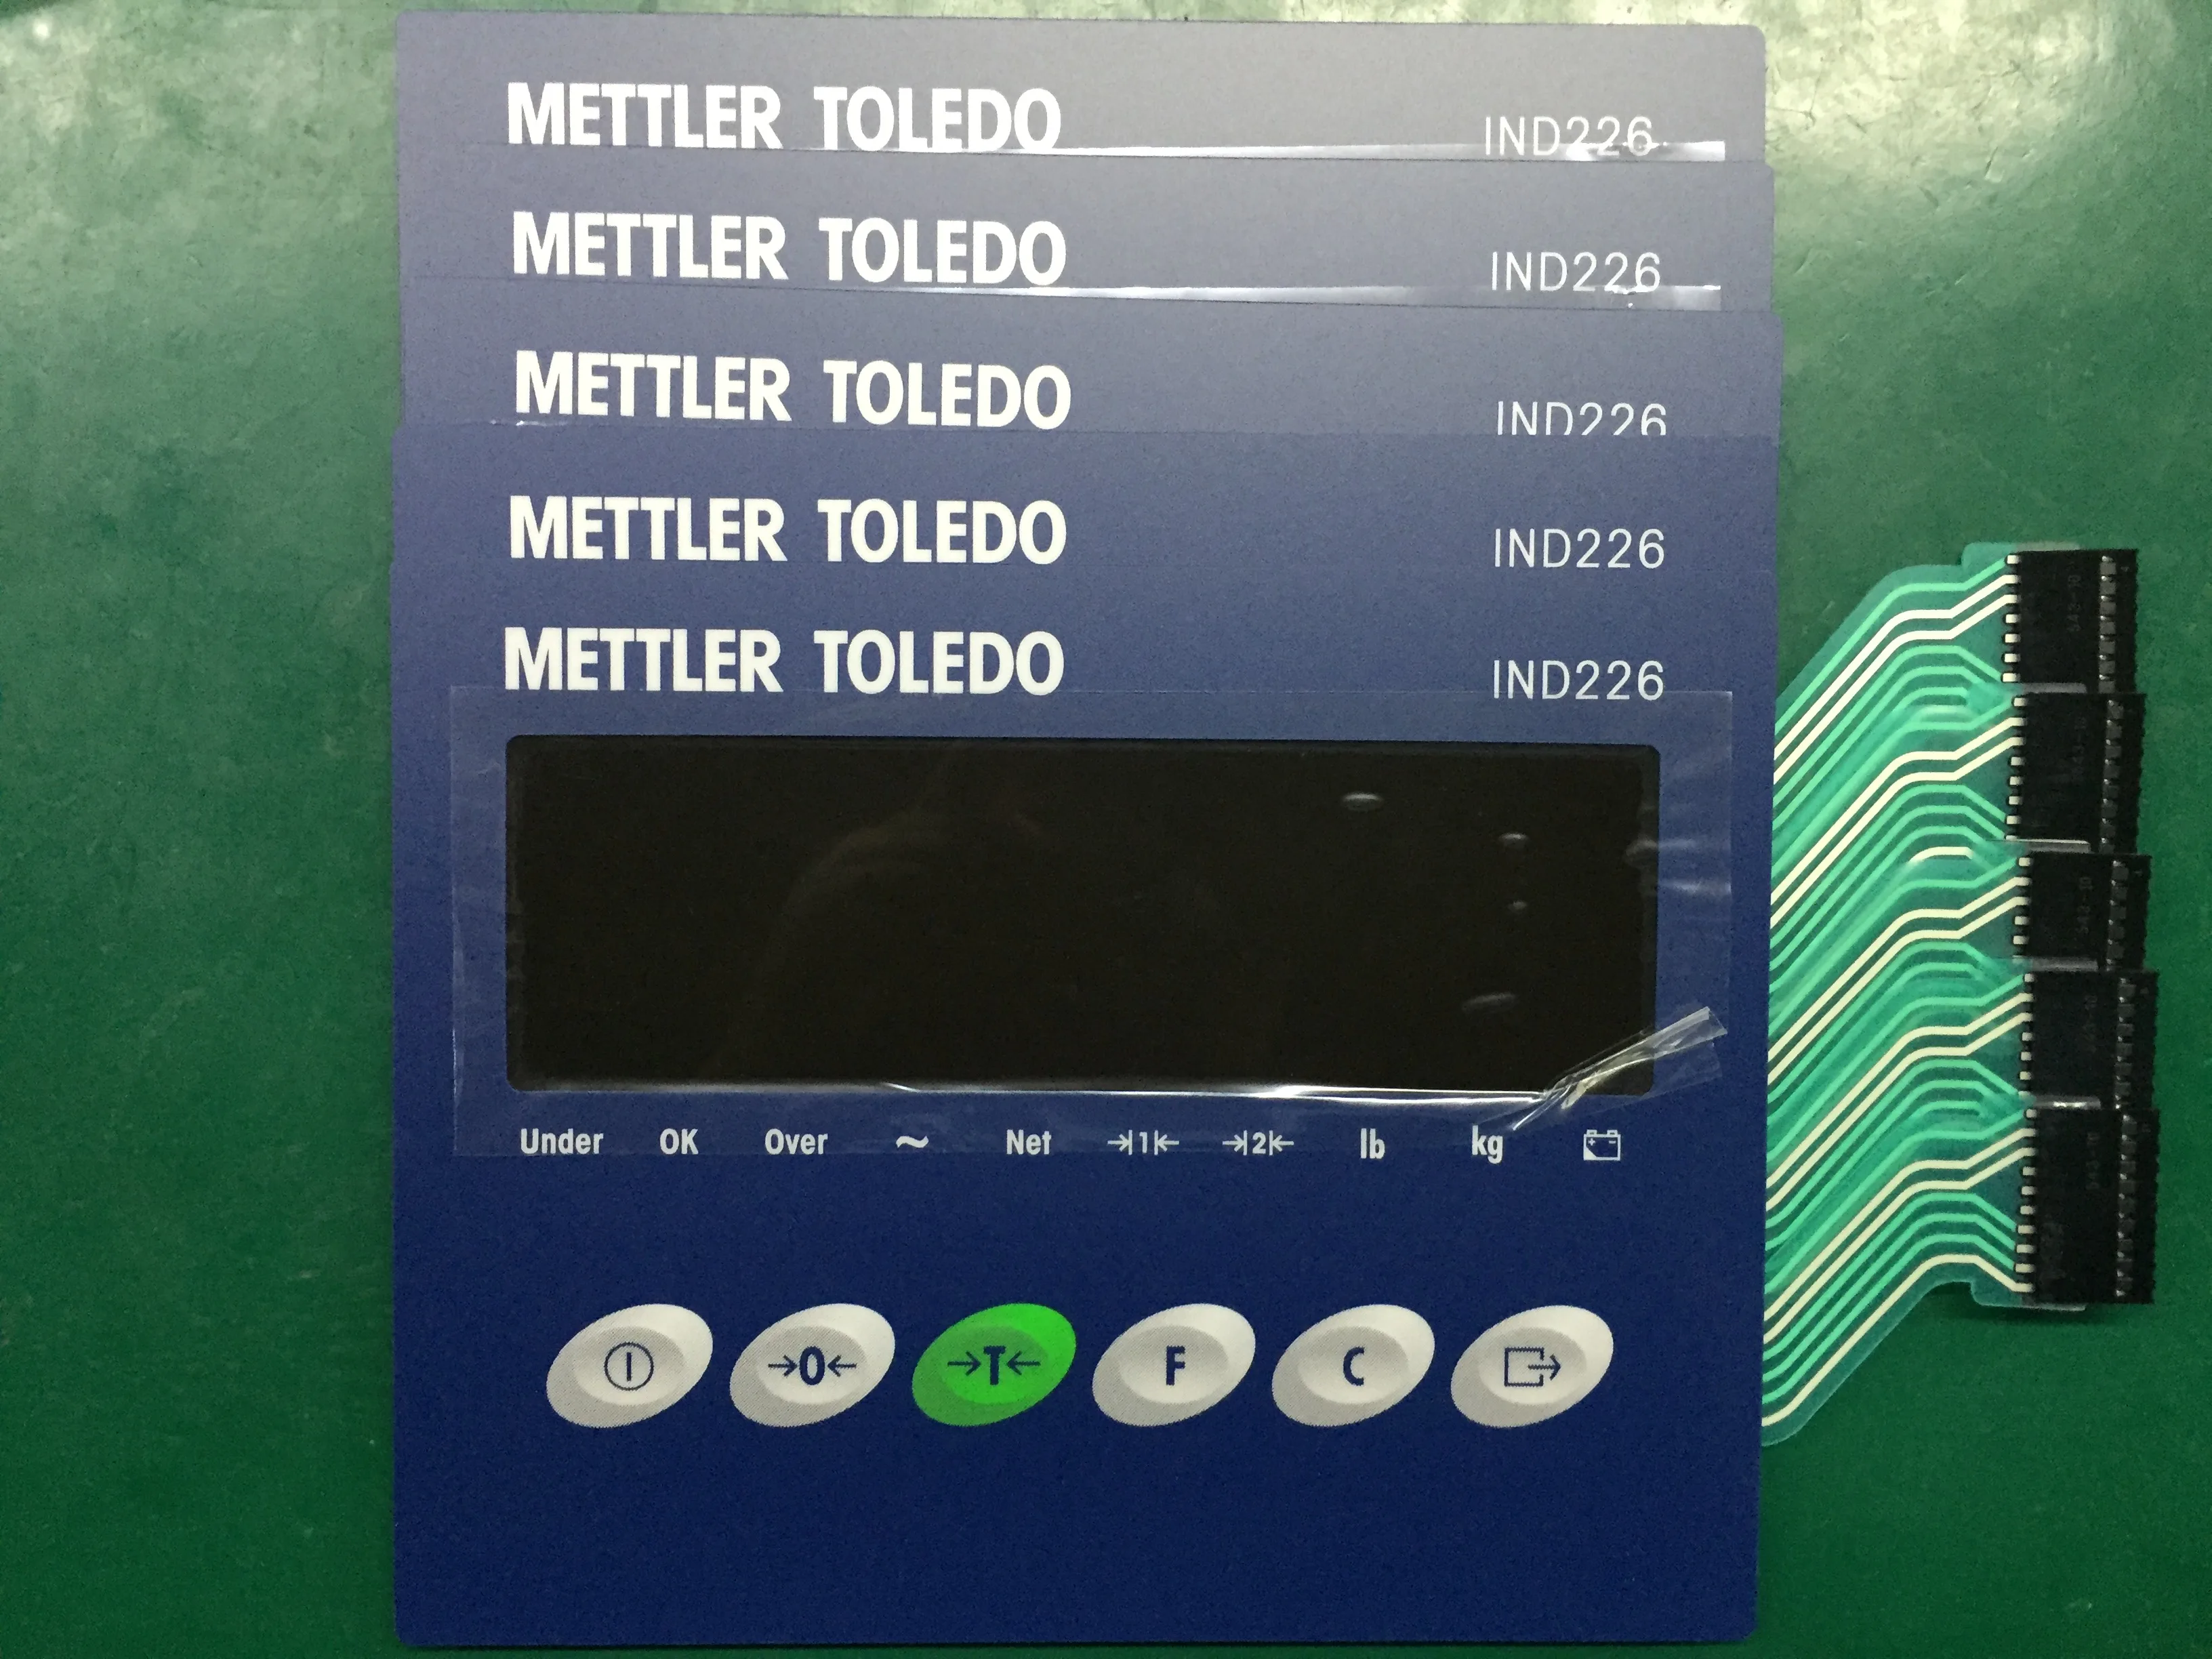 New Replacement Touch Membrane Keypad for METTLER TOLEDO Weighing Indicator IND226